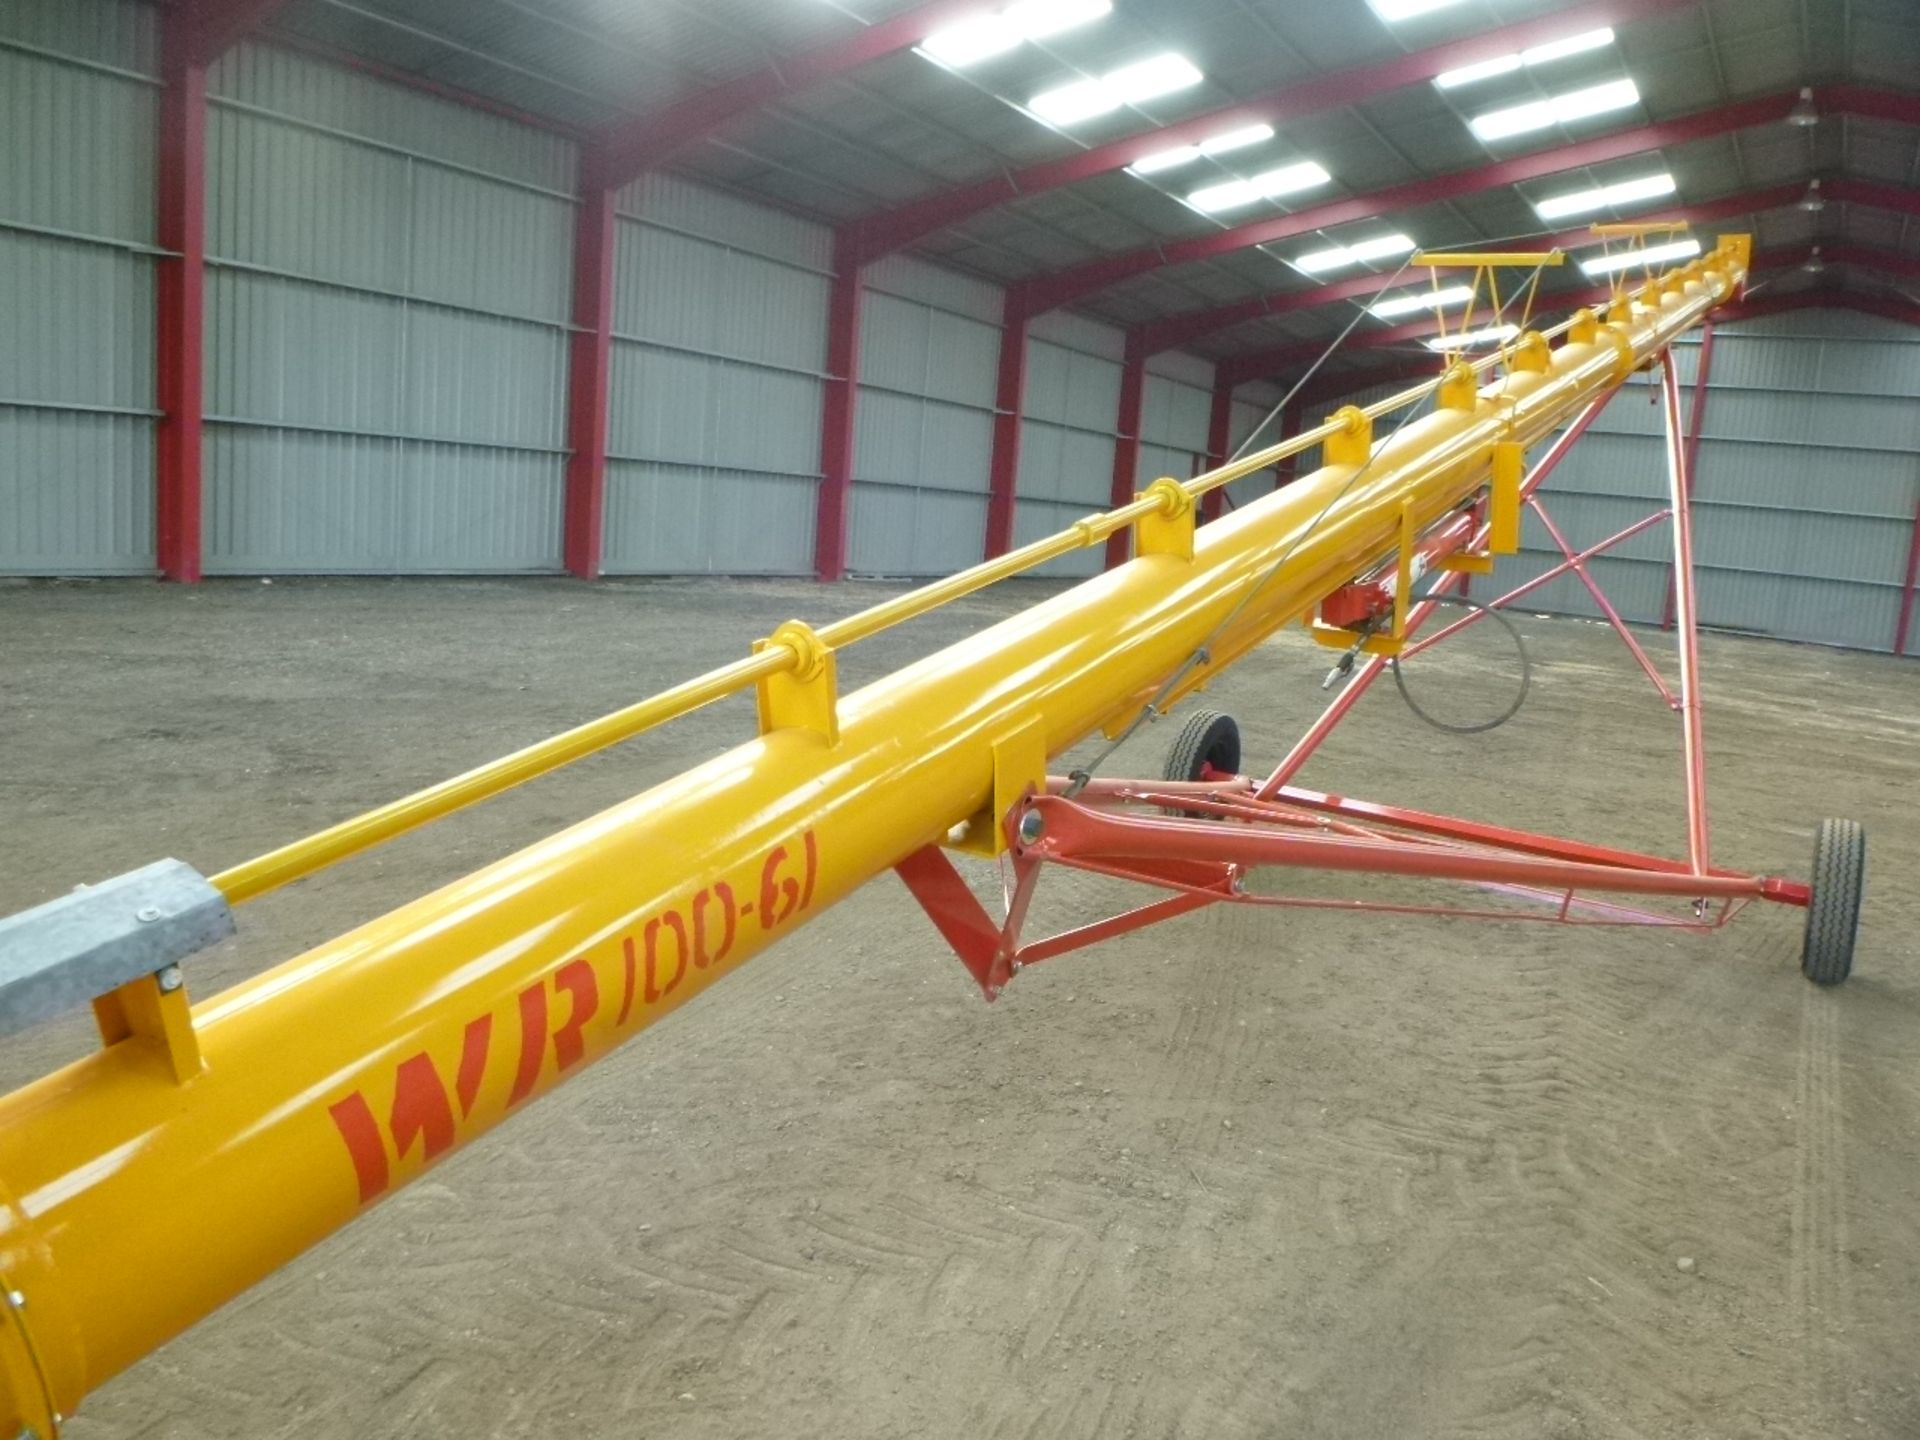 Westfield WR 100-61 Grain Auger, approx. 61'/18.5m long, 10in./250mm dia., capacity up to 120tph, - Image 9 of 18